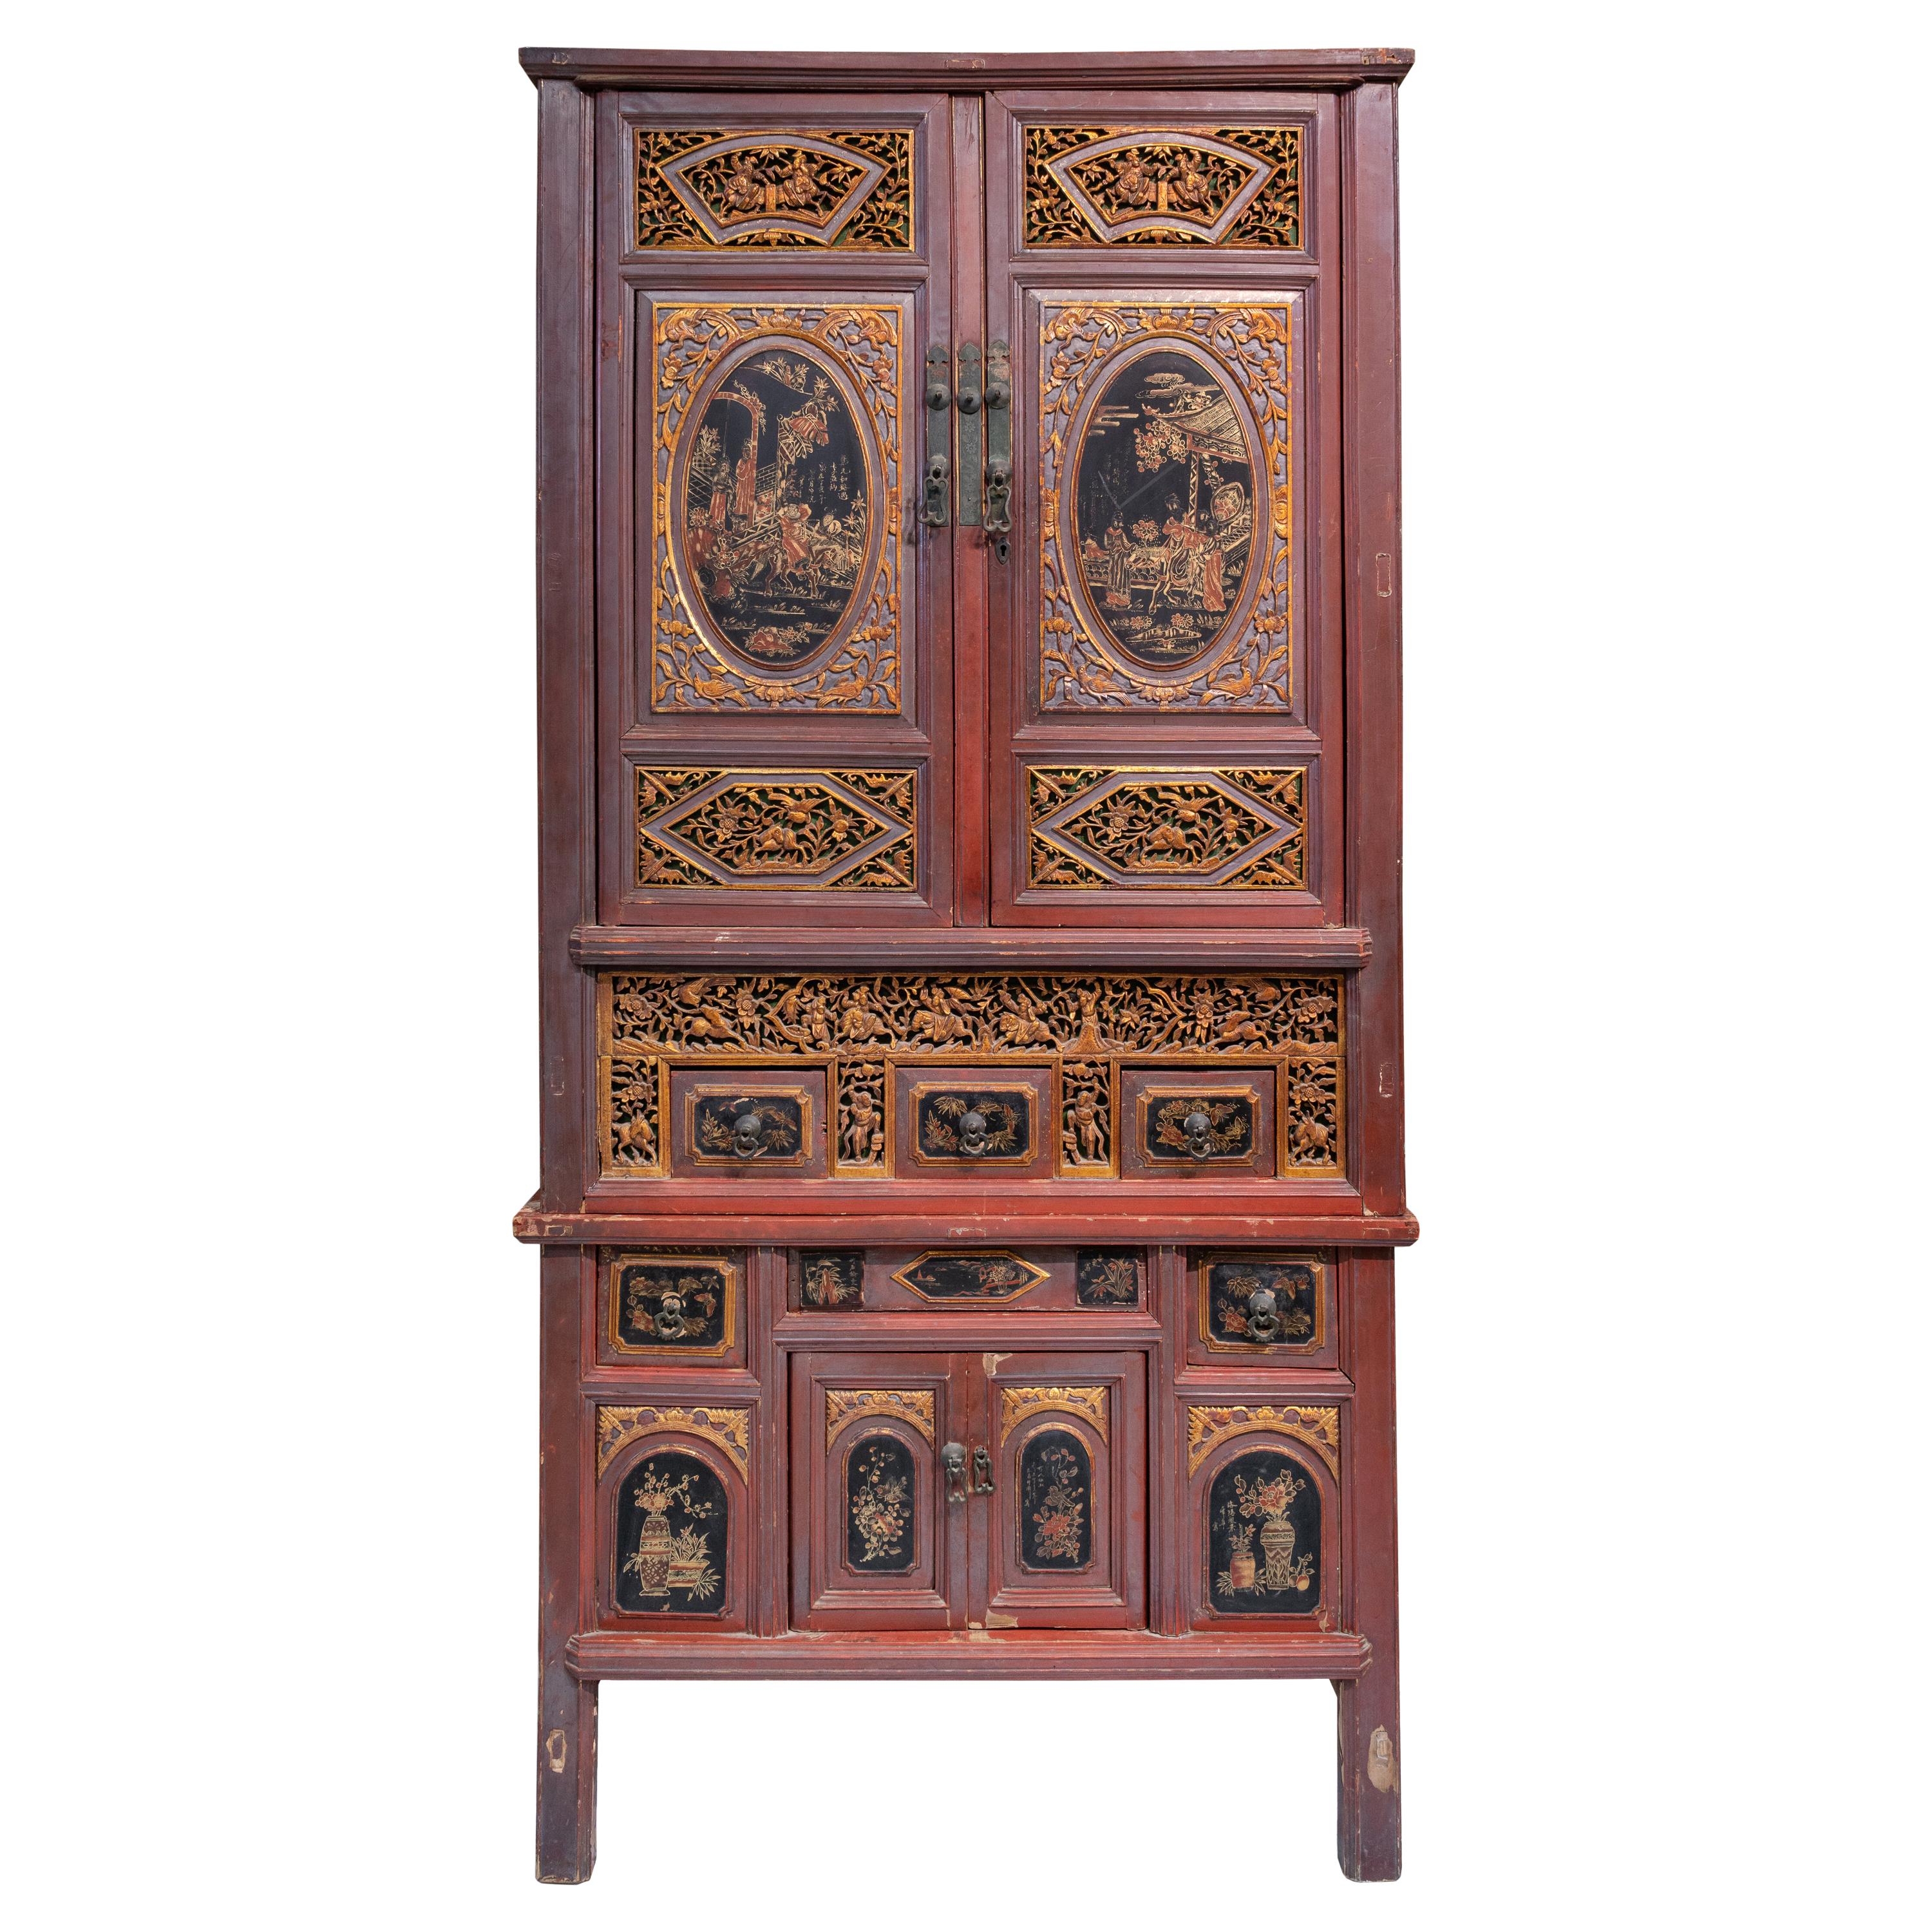 Early 20th Century Carved Cabinet from Fujian, China